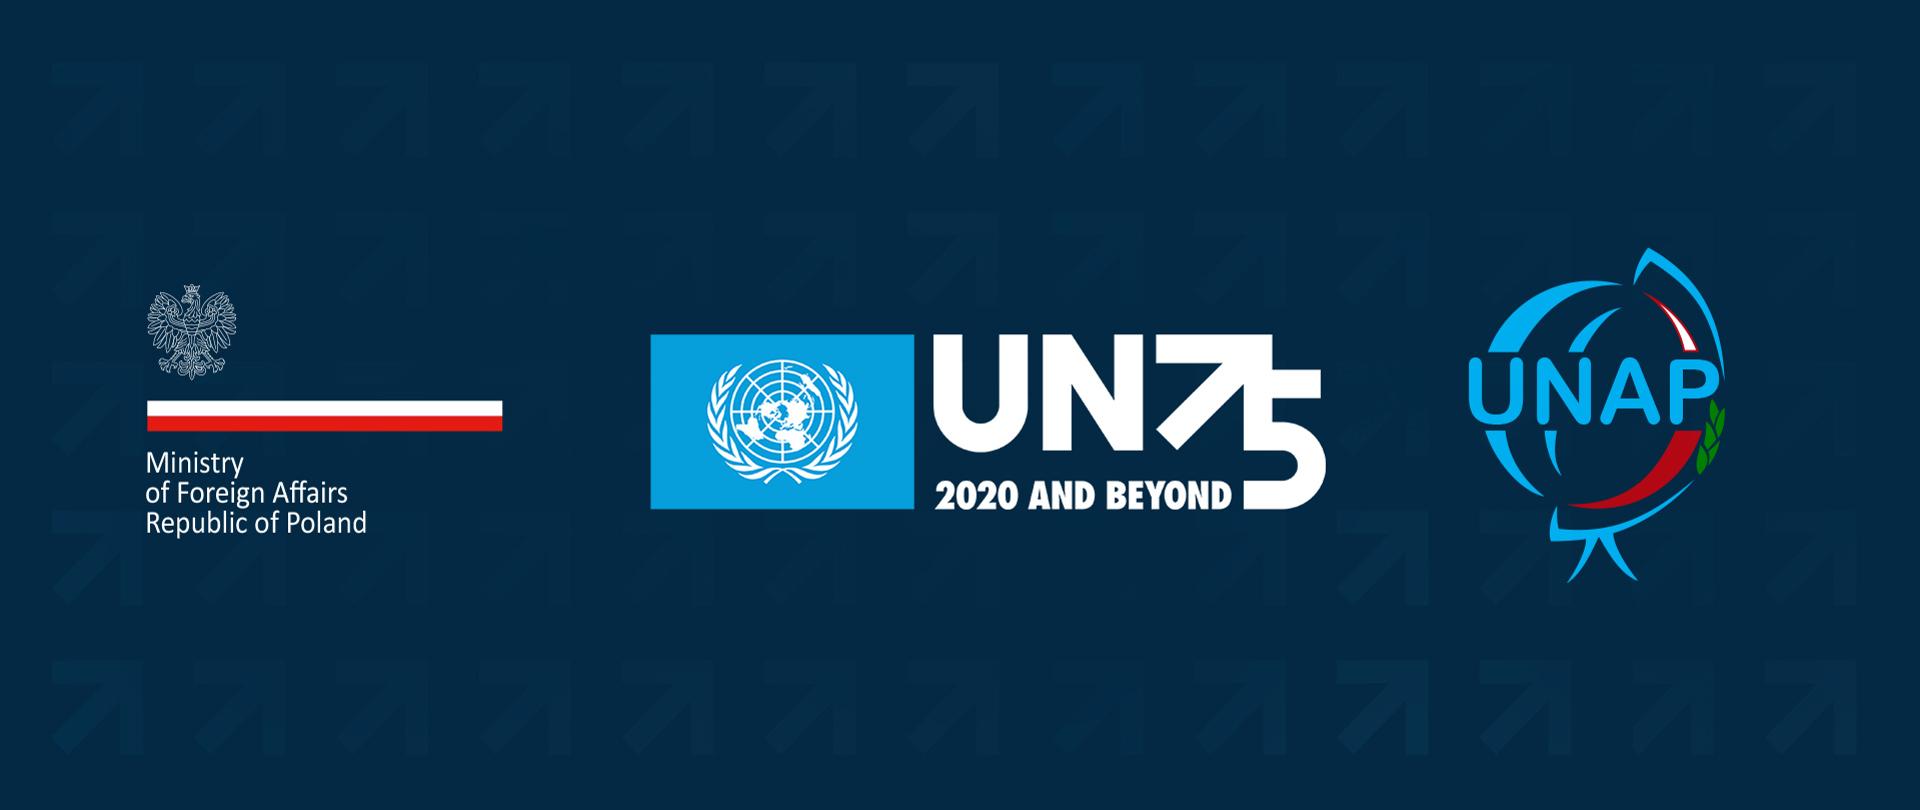 The MFA organised a series of expert panels and an information and promotional campaign under the slogan “UN Week” to mark the 75th anniversary of the establishment of the United Nations Organisation.